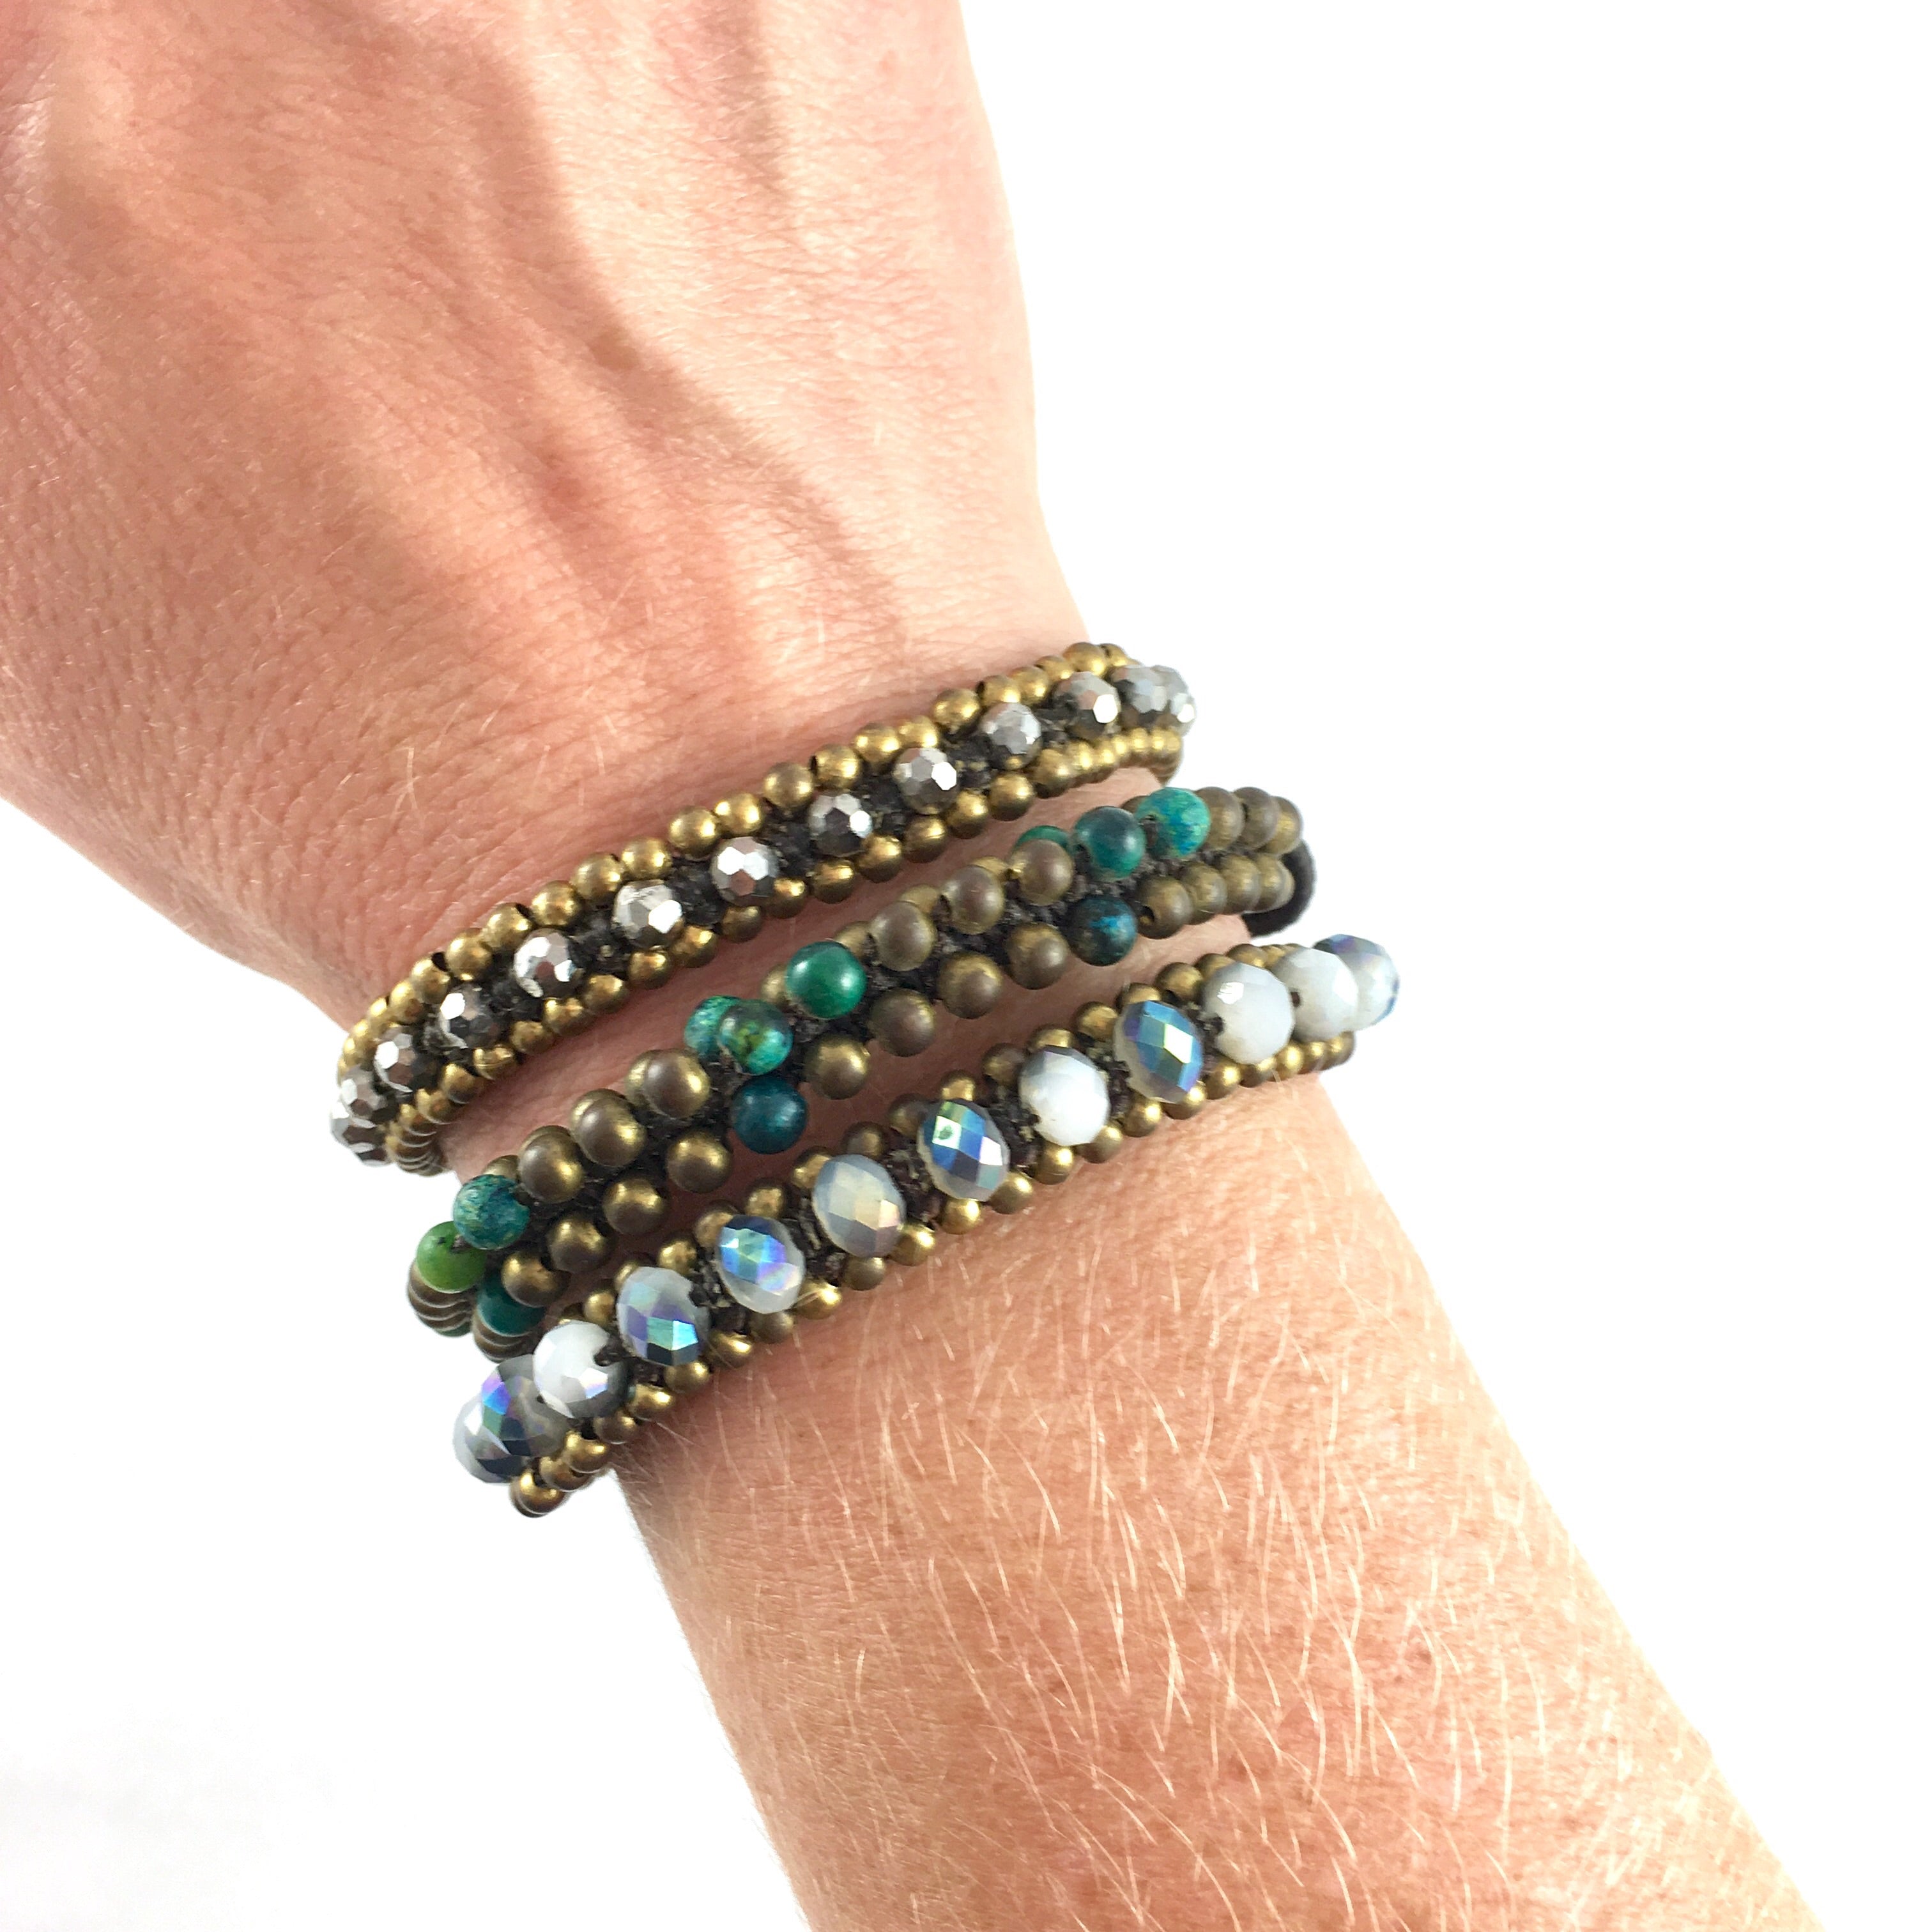 Bracelet with Turquoise and Brass